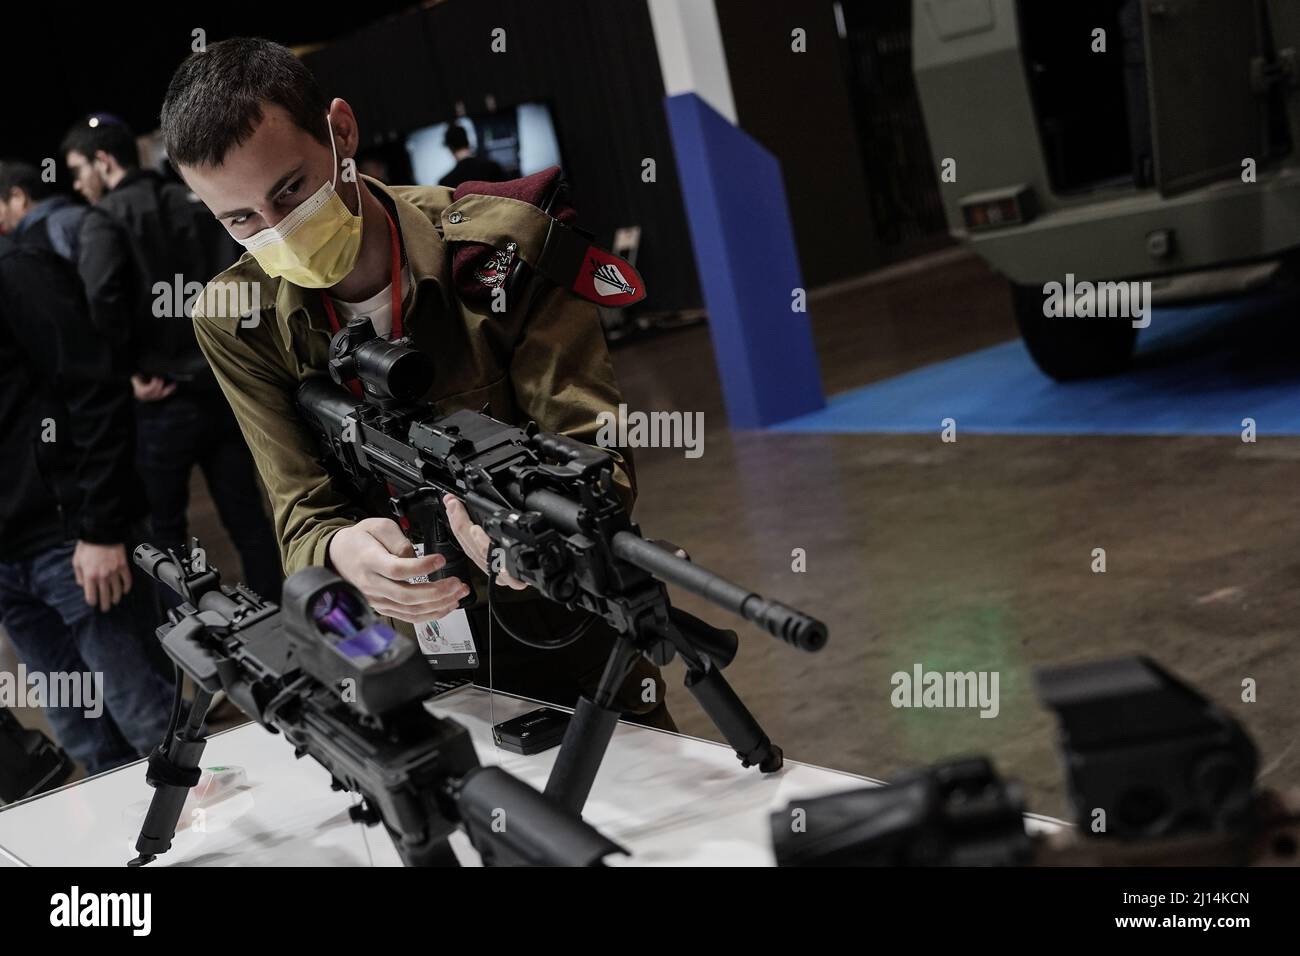 Tel Aviv, Israel. 22nd March, 2022. An IDF soldier from the Paratroopers Brigade examines a rifle at ISDEF, Israel's International Security and Defense exhibition, as it opens at EXPO Tel Aviv. The exhibition highlights equipment and technologies for defense, home land security, mega event protection, cybersecurity, intelligence and counter terrorism. ISDEF hosts over 300 exhibiting companies and will be attended by 10,000 visitors and 50 delegations including first time visitors from the Gulf countries and Morocco. Credit: Nir Alon/Alamy Live News Stock Photo